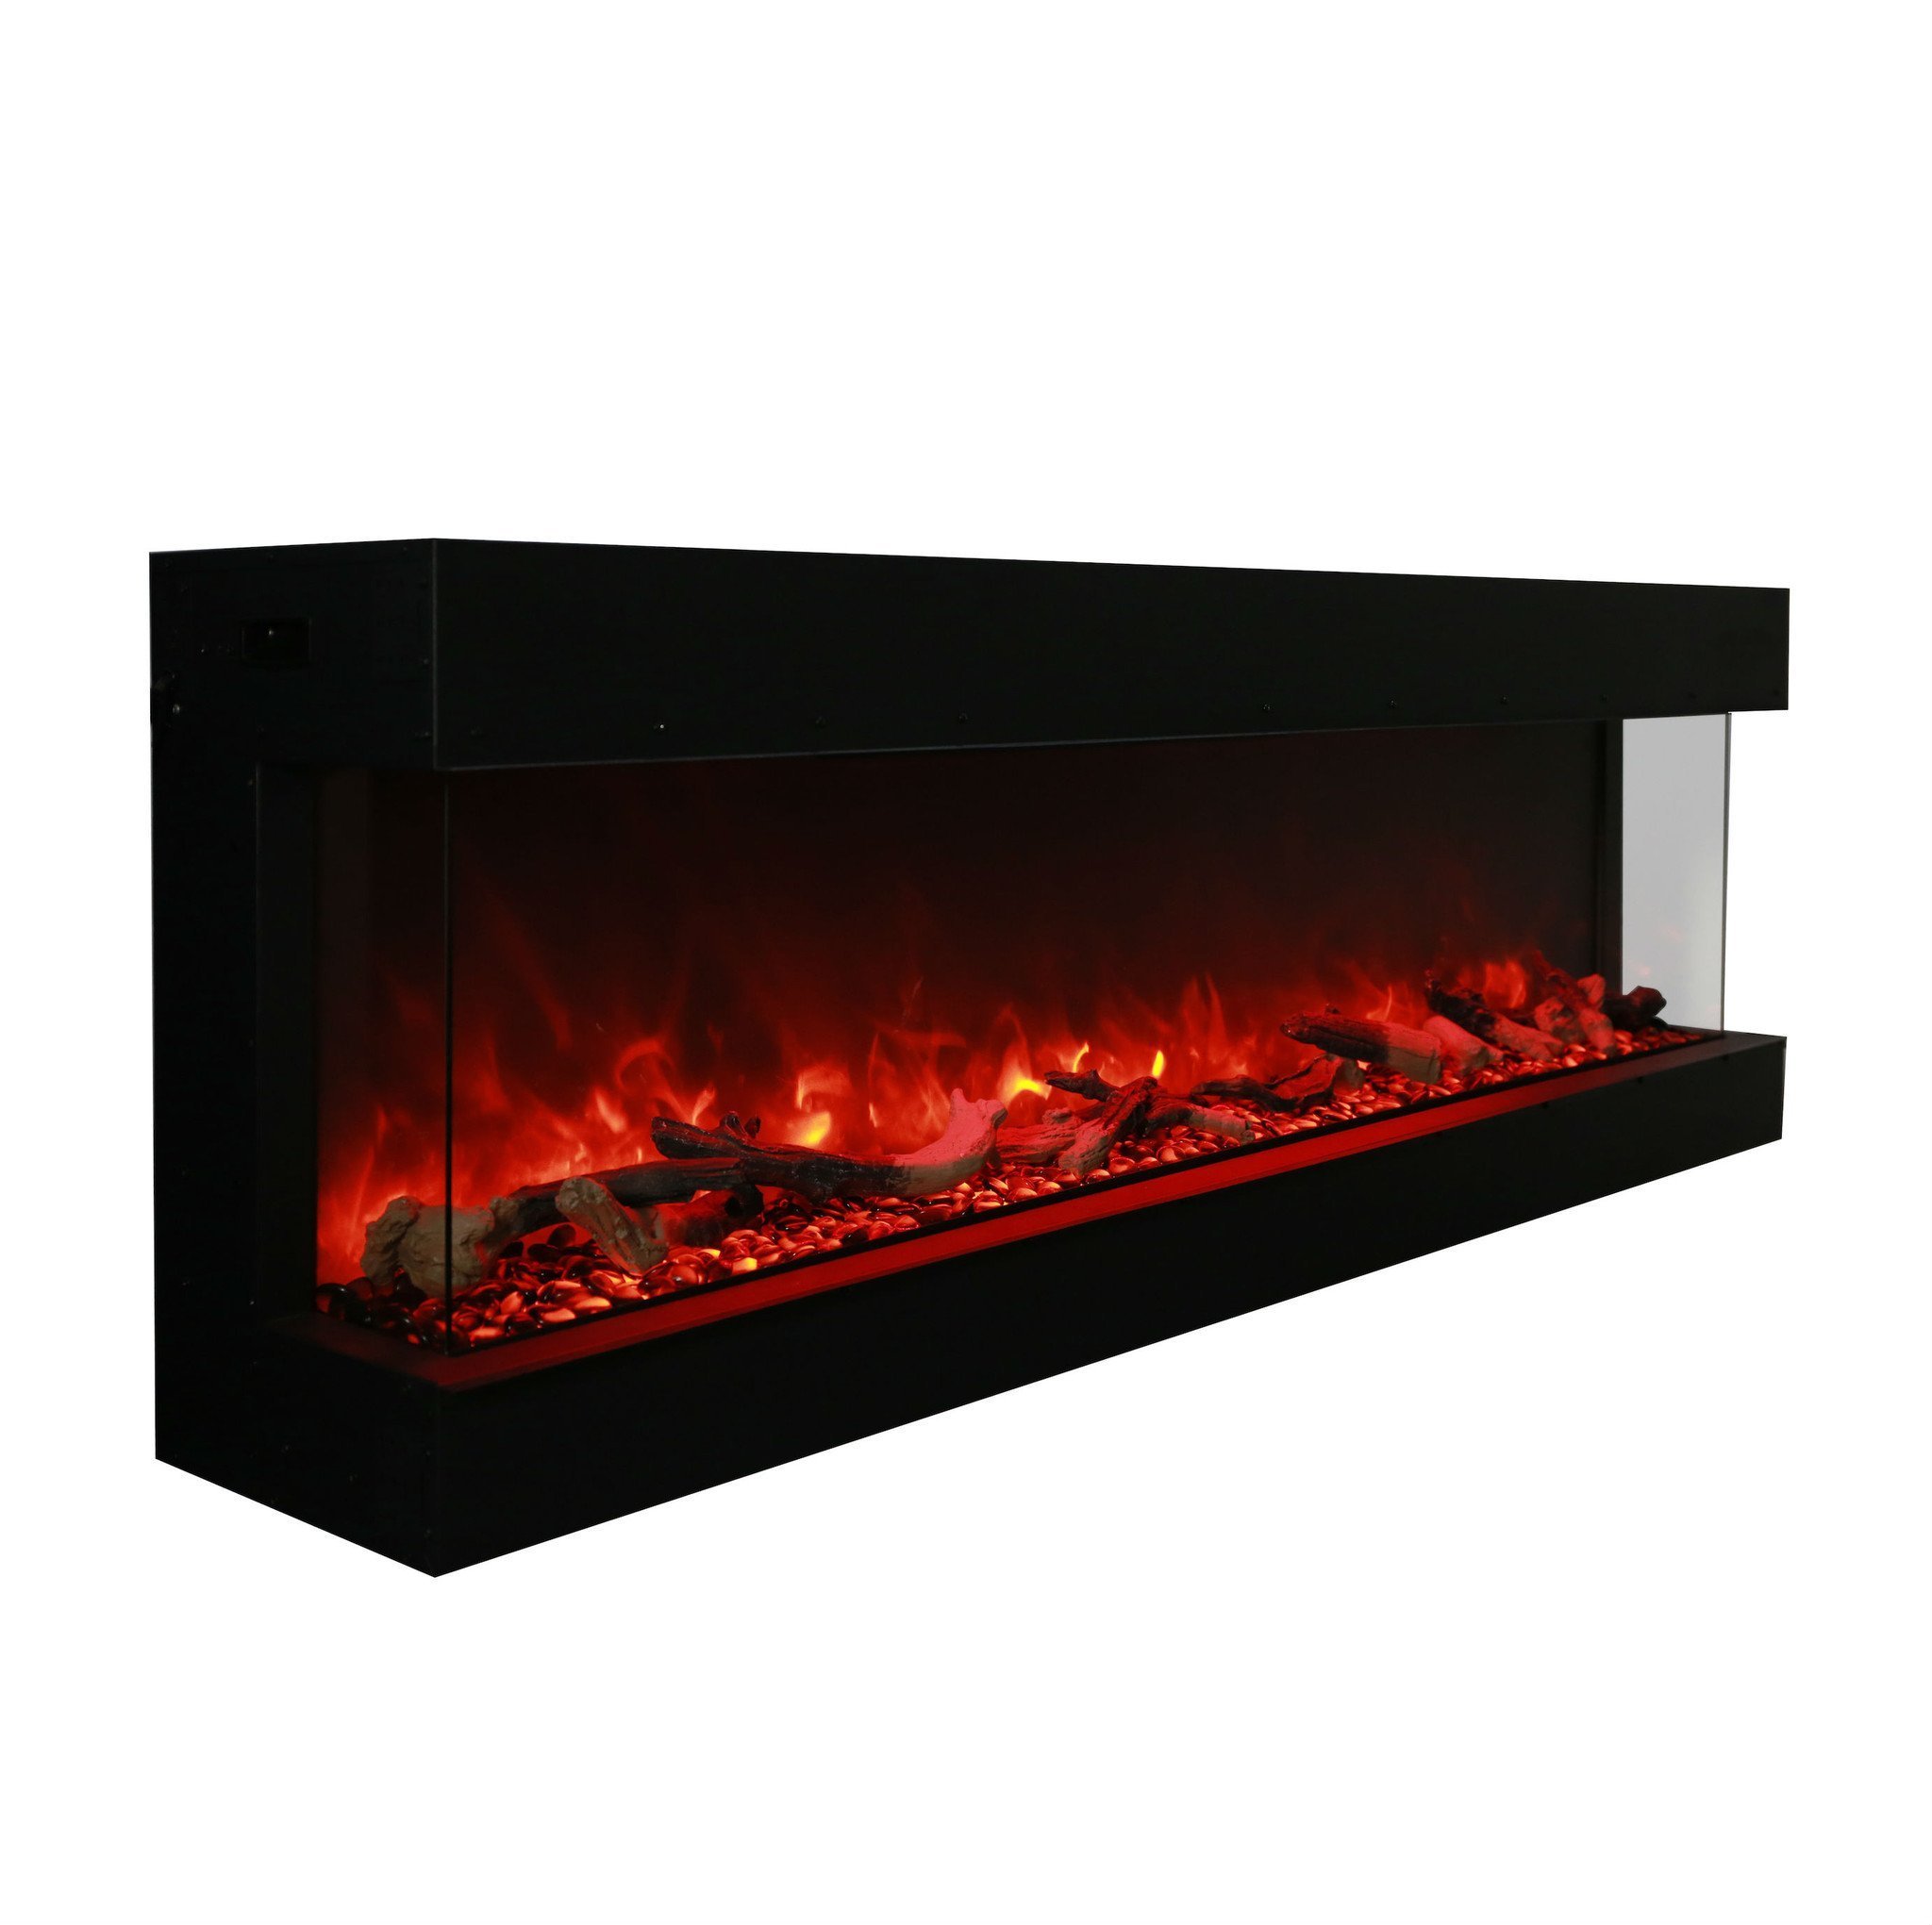 72 Inch Electric Fireplace Inspirational Outdoor Electric Fireplaces On Sale Modern Blaze